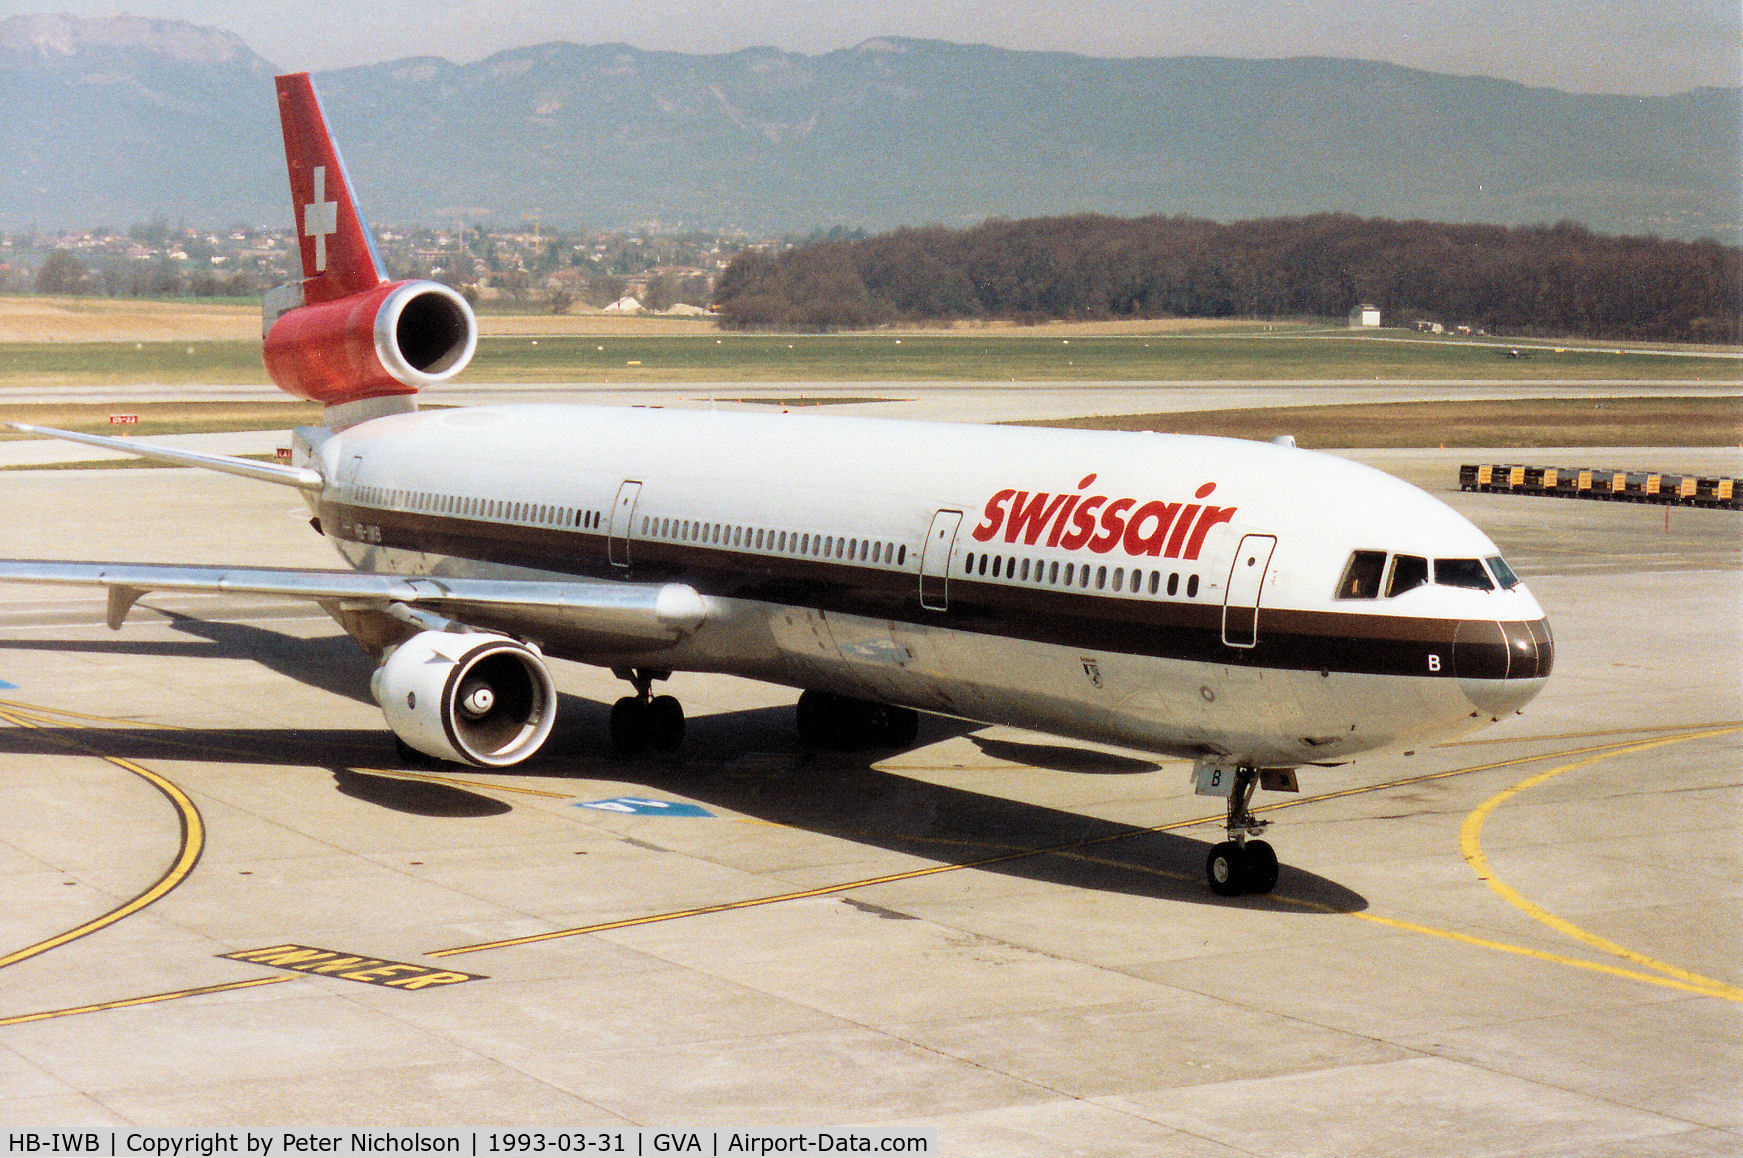 HB-IWB, 1991 McDonnell Douglas MD-11F C/N 48444, MD-11 of Swissair taxying to the terminal at Geneva in March 1993 - the aircraft was later to be converted to freighter configuration.